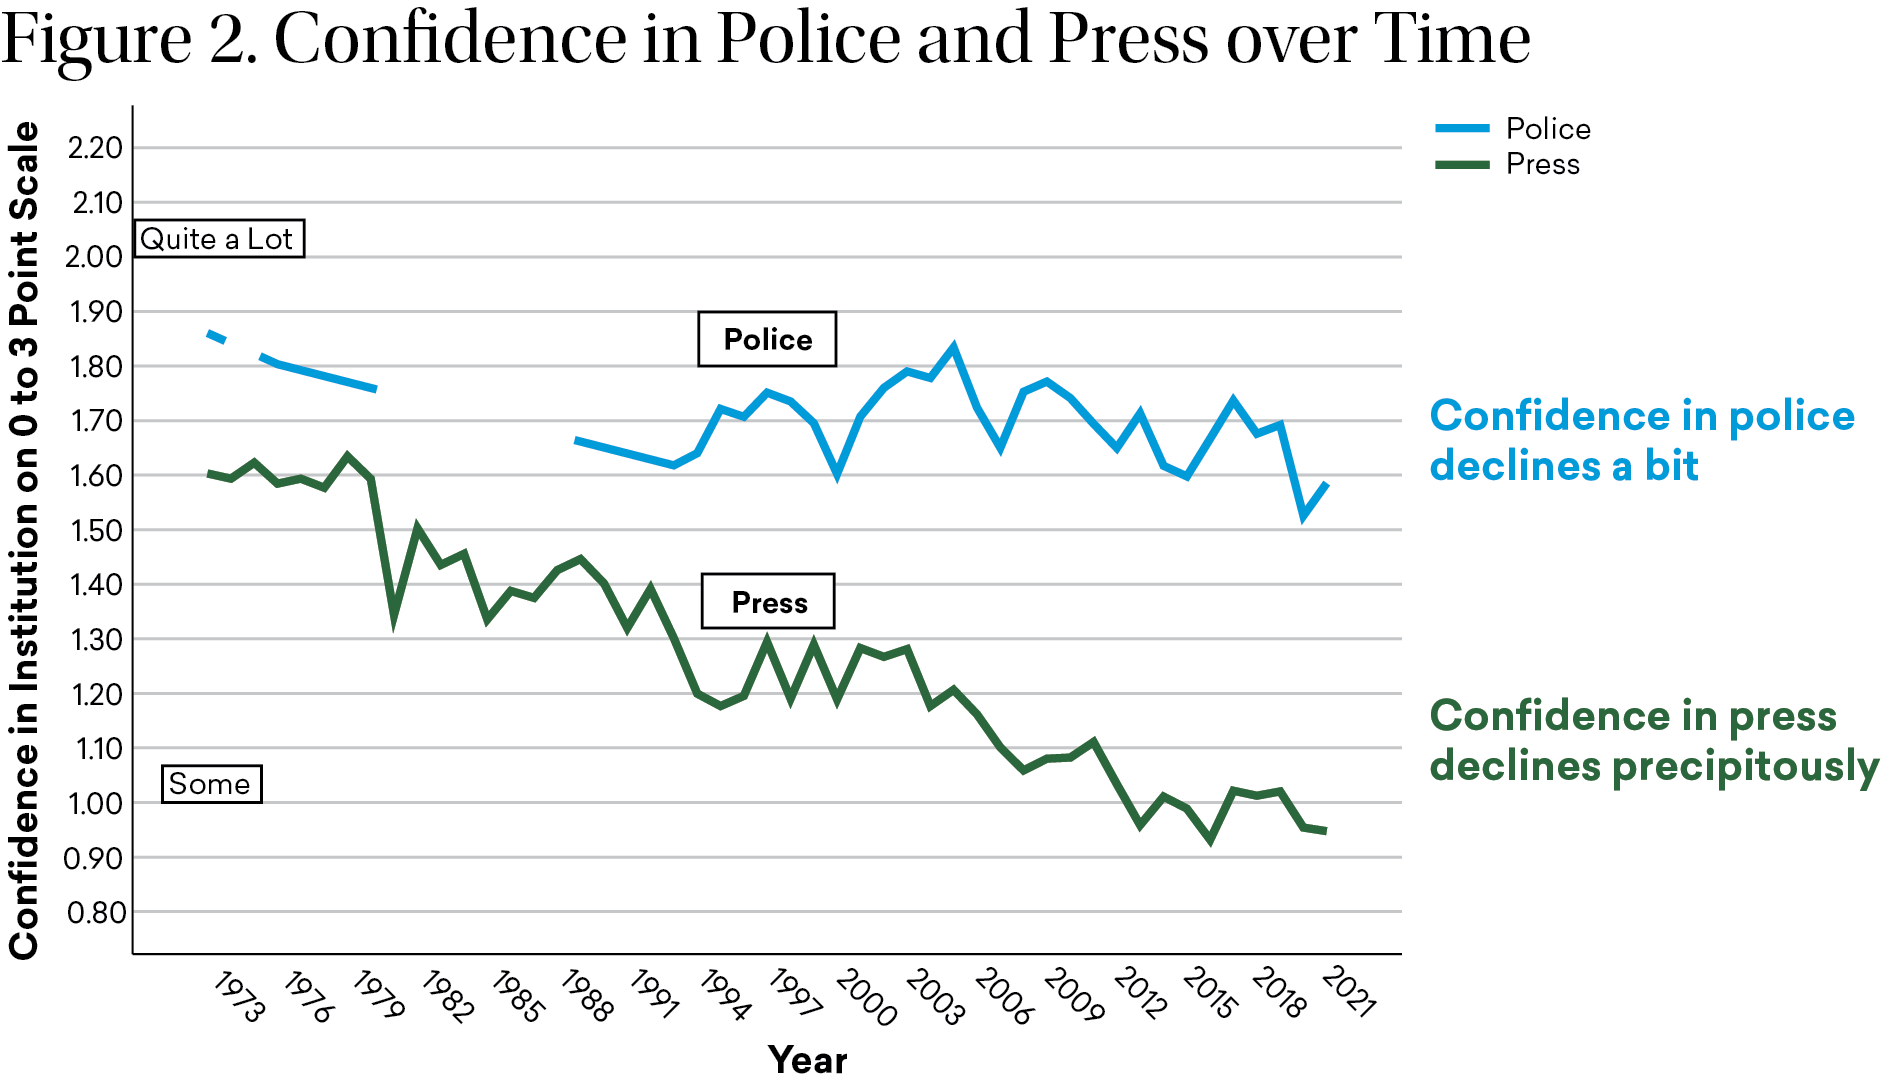 Figure 2: A line chart shows declining confidence in two institutions between 1973 and 2021: police and the press. Confidence declines more for the press than the police.